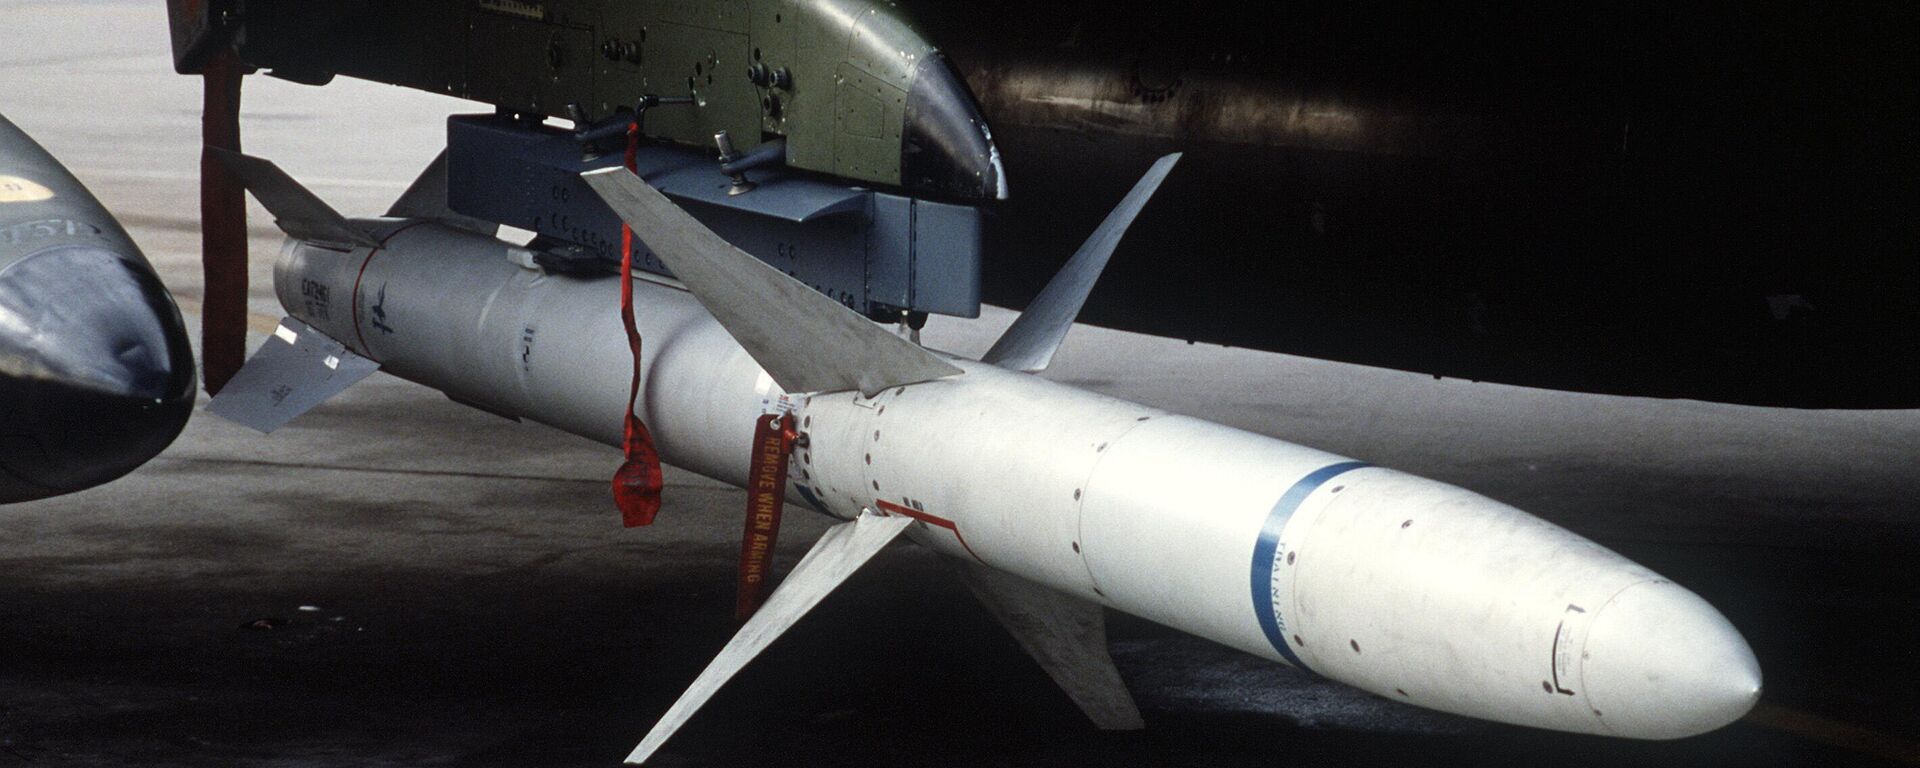 A view of an AGM-88 HARM high-speed anti-radiation missile mounted beneath the wing of a 37th Tactical Fighter Wing F-4G Phantom II Wild Weasel aircraft. - Sputnik International, 1920, 24.11.2022